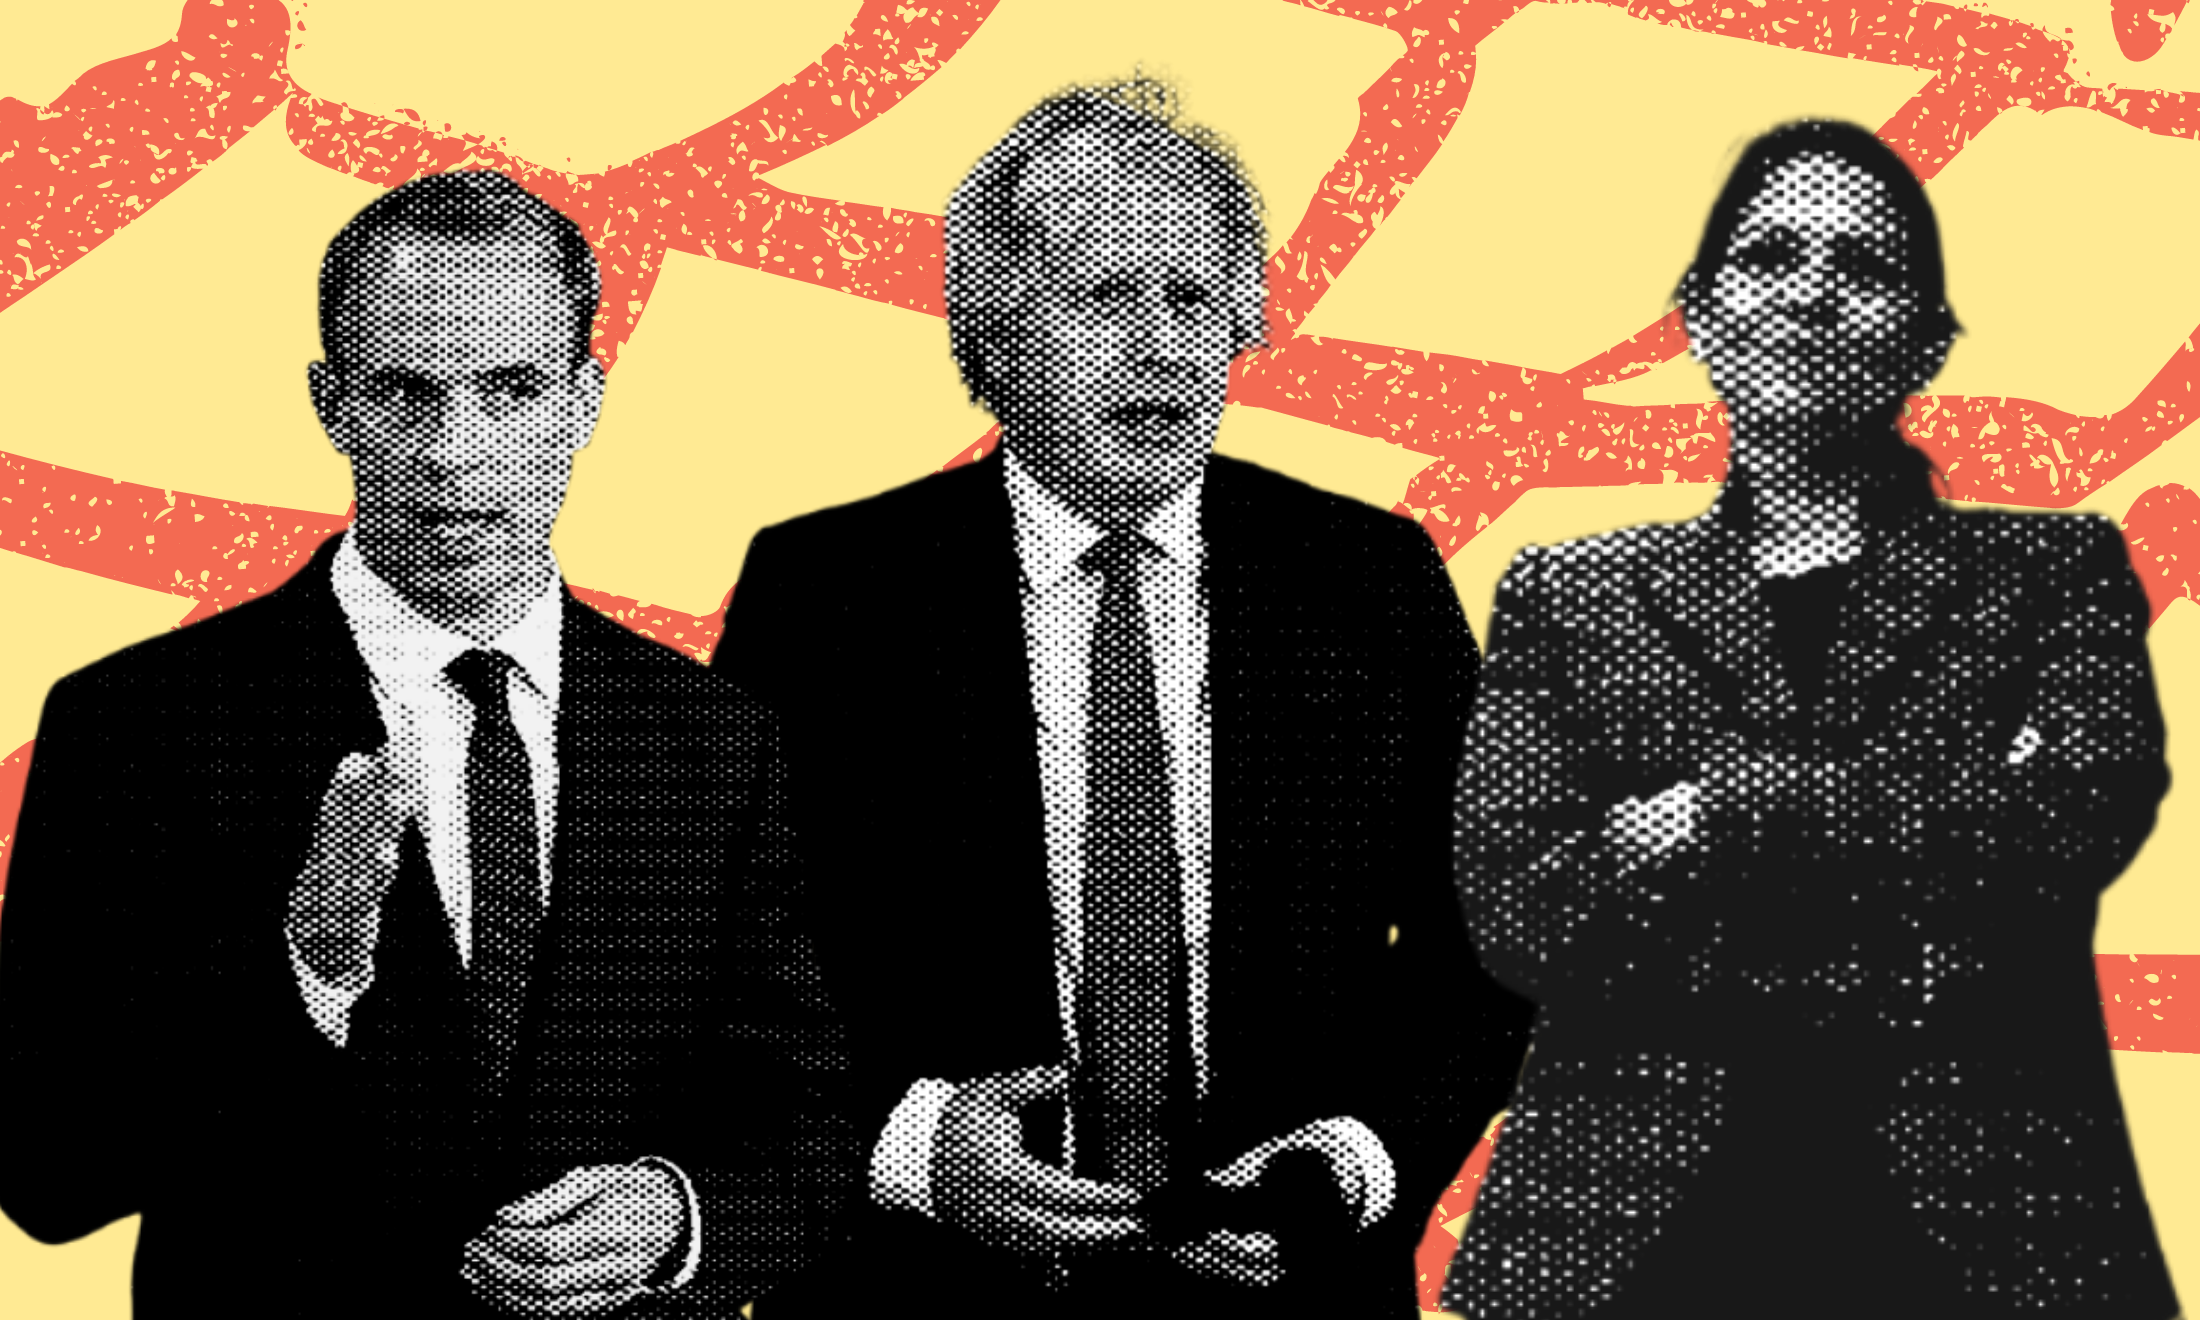 The gal-dem guide to every terrible bill the Tories are trying to pass this year